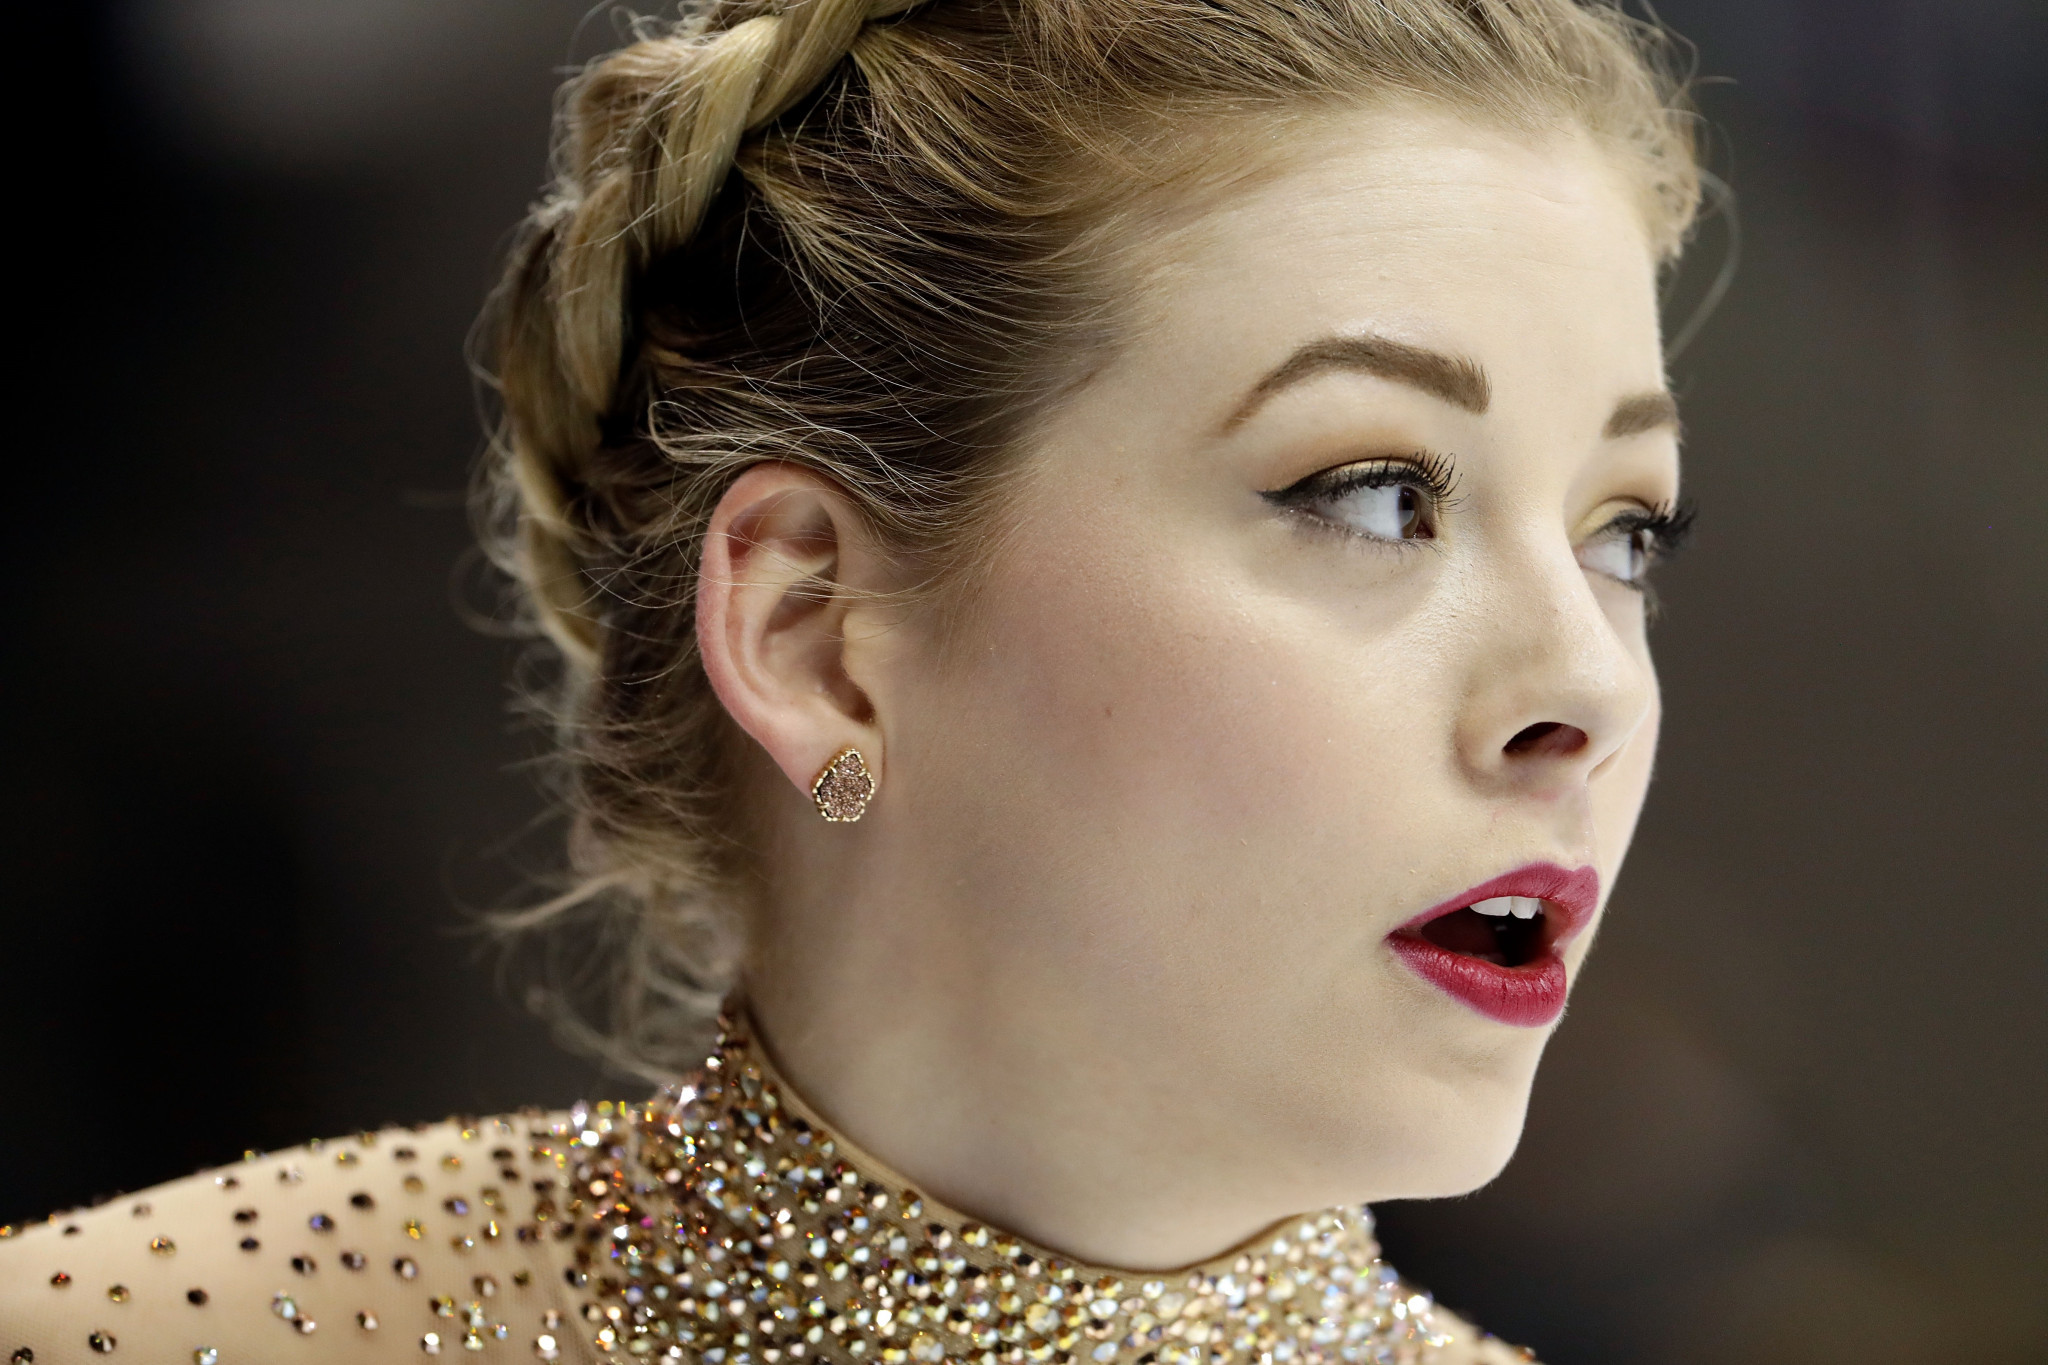 American figure skater Gracie Gold’s chances of competing at the Pyeongchang 2018 Winter Olympic Games have ended ©Getty Images